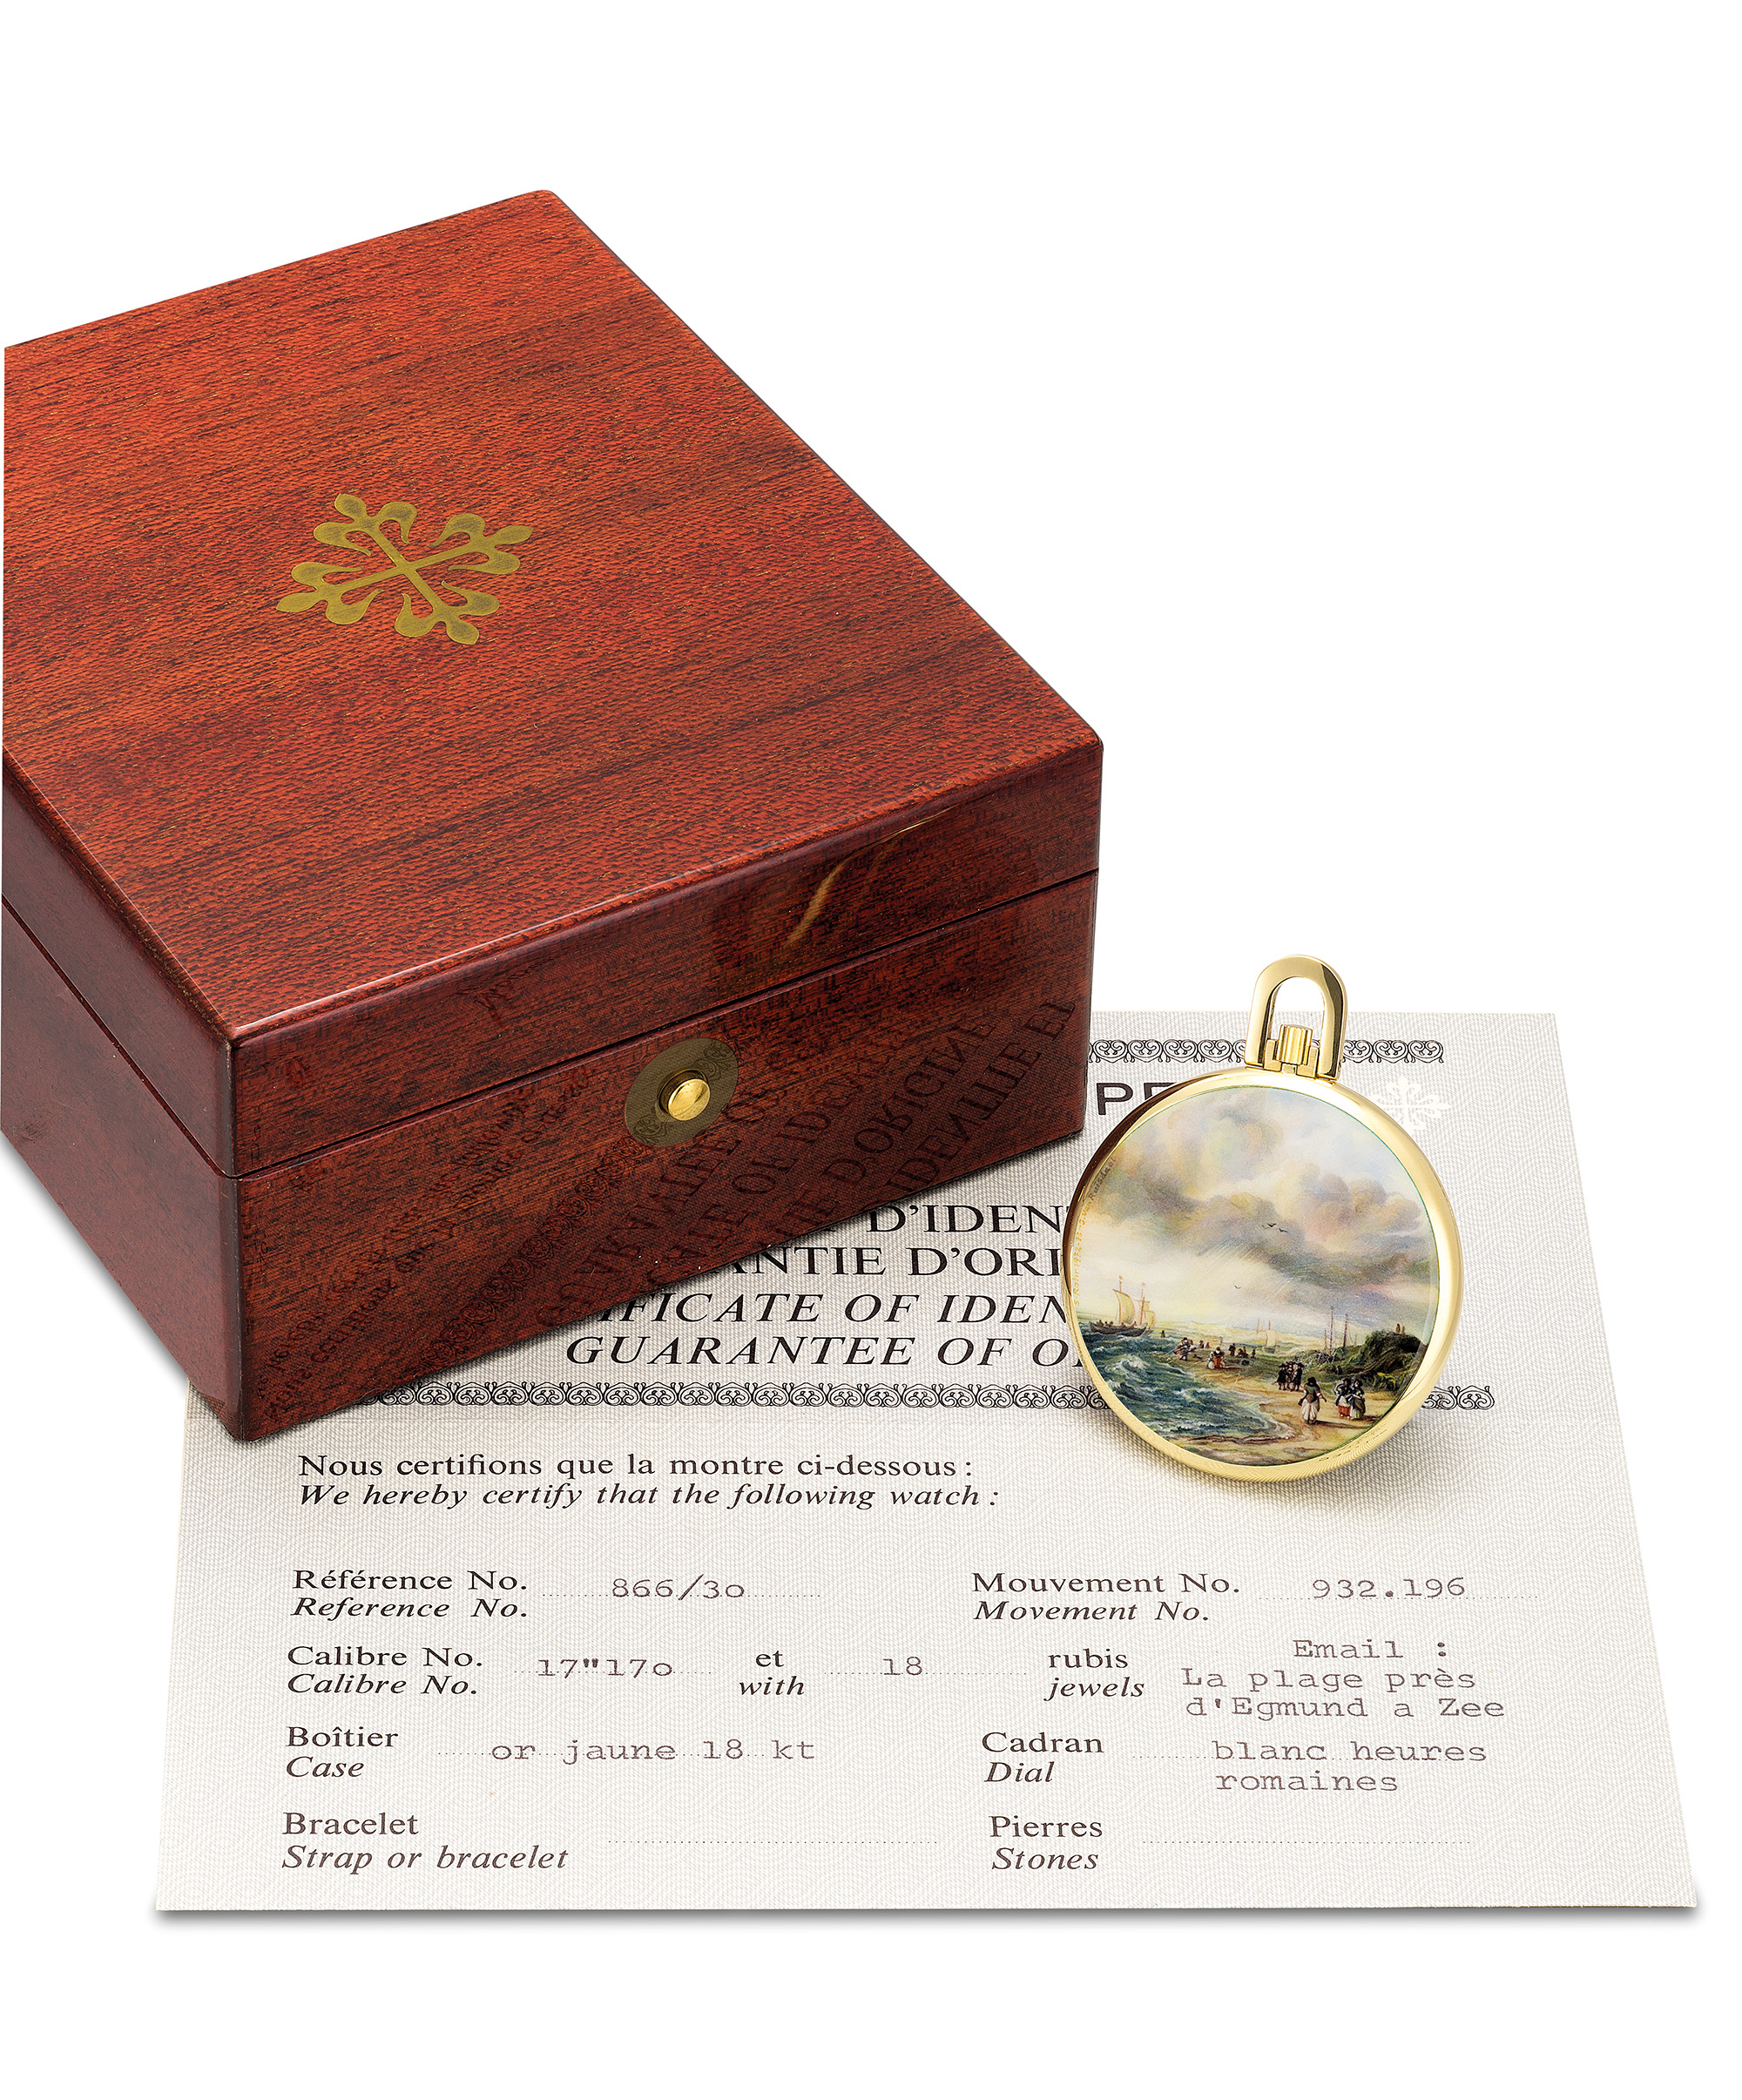 An exceptional and unique yellow gold openface watch with enamel miniature painted by Suzanne Rohr after a painting by Jacob van Ruisdael with original certificate and fitted presentation box, reference 866:30, manufactured in 1973